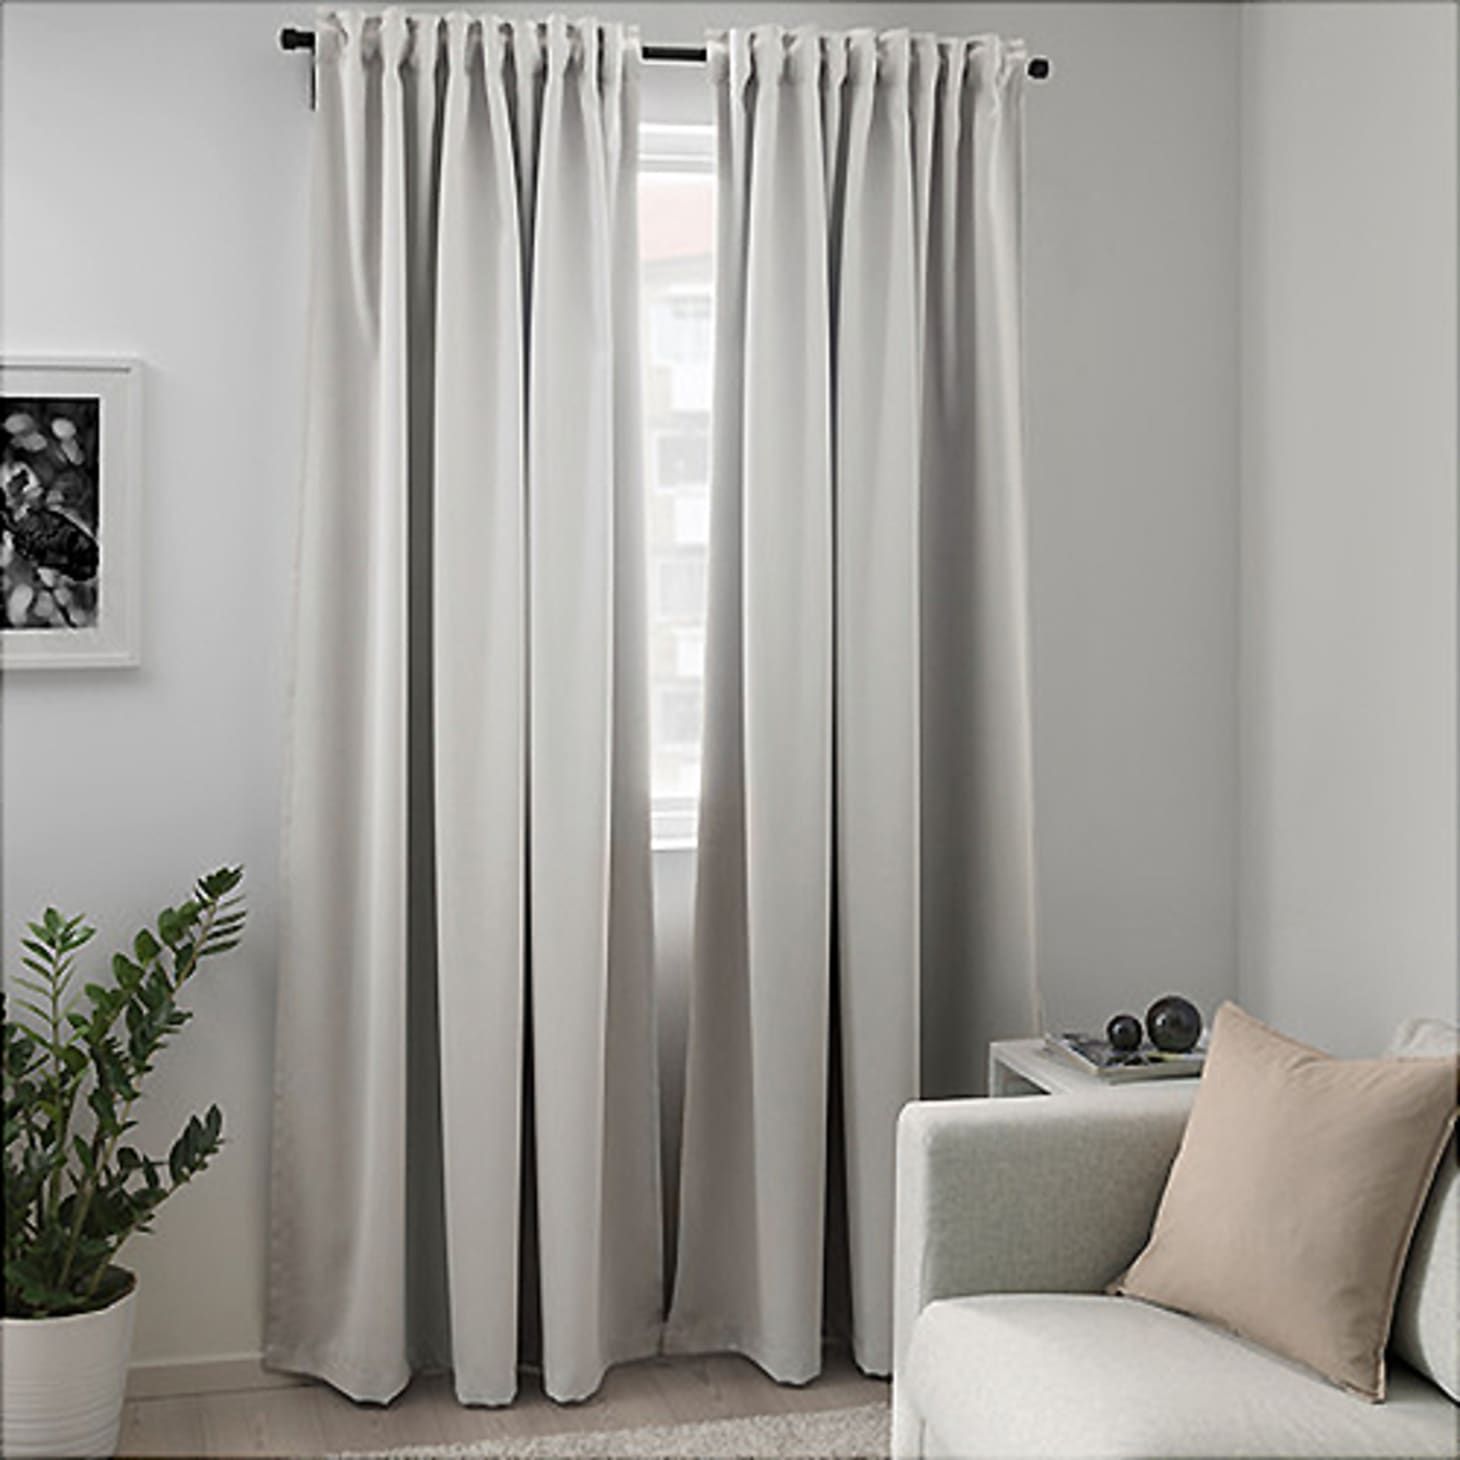 Best Insulated Blackout Curtains | Apartment Therapy Throughout Thermal Insulated Blackout Curtain Pairs (View 30 of 30)